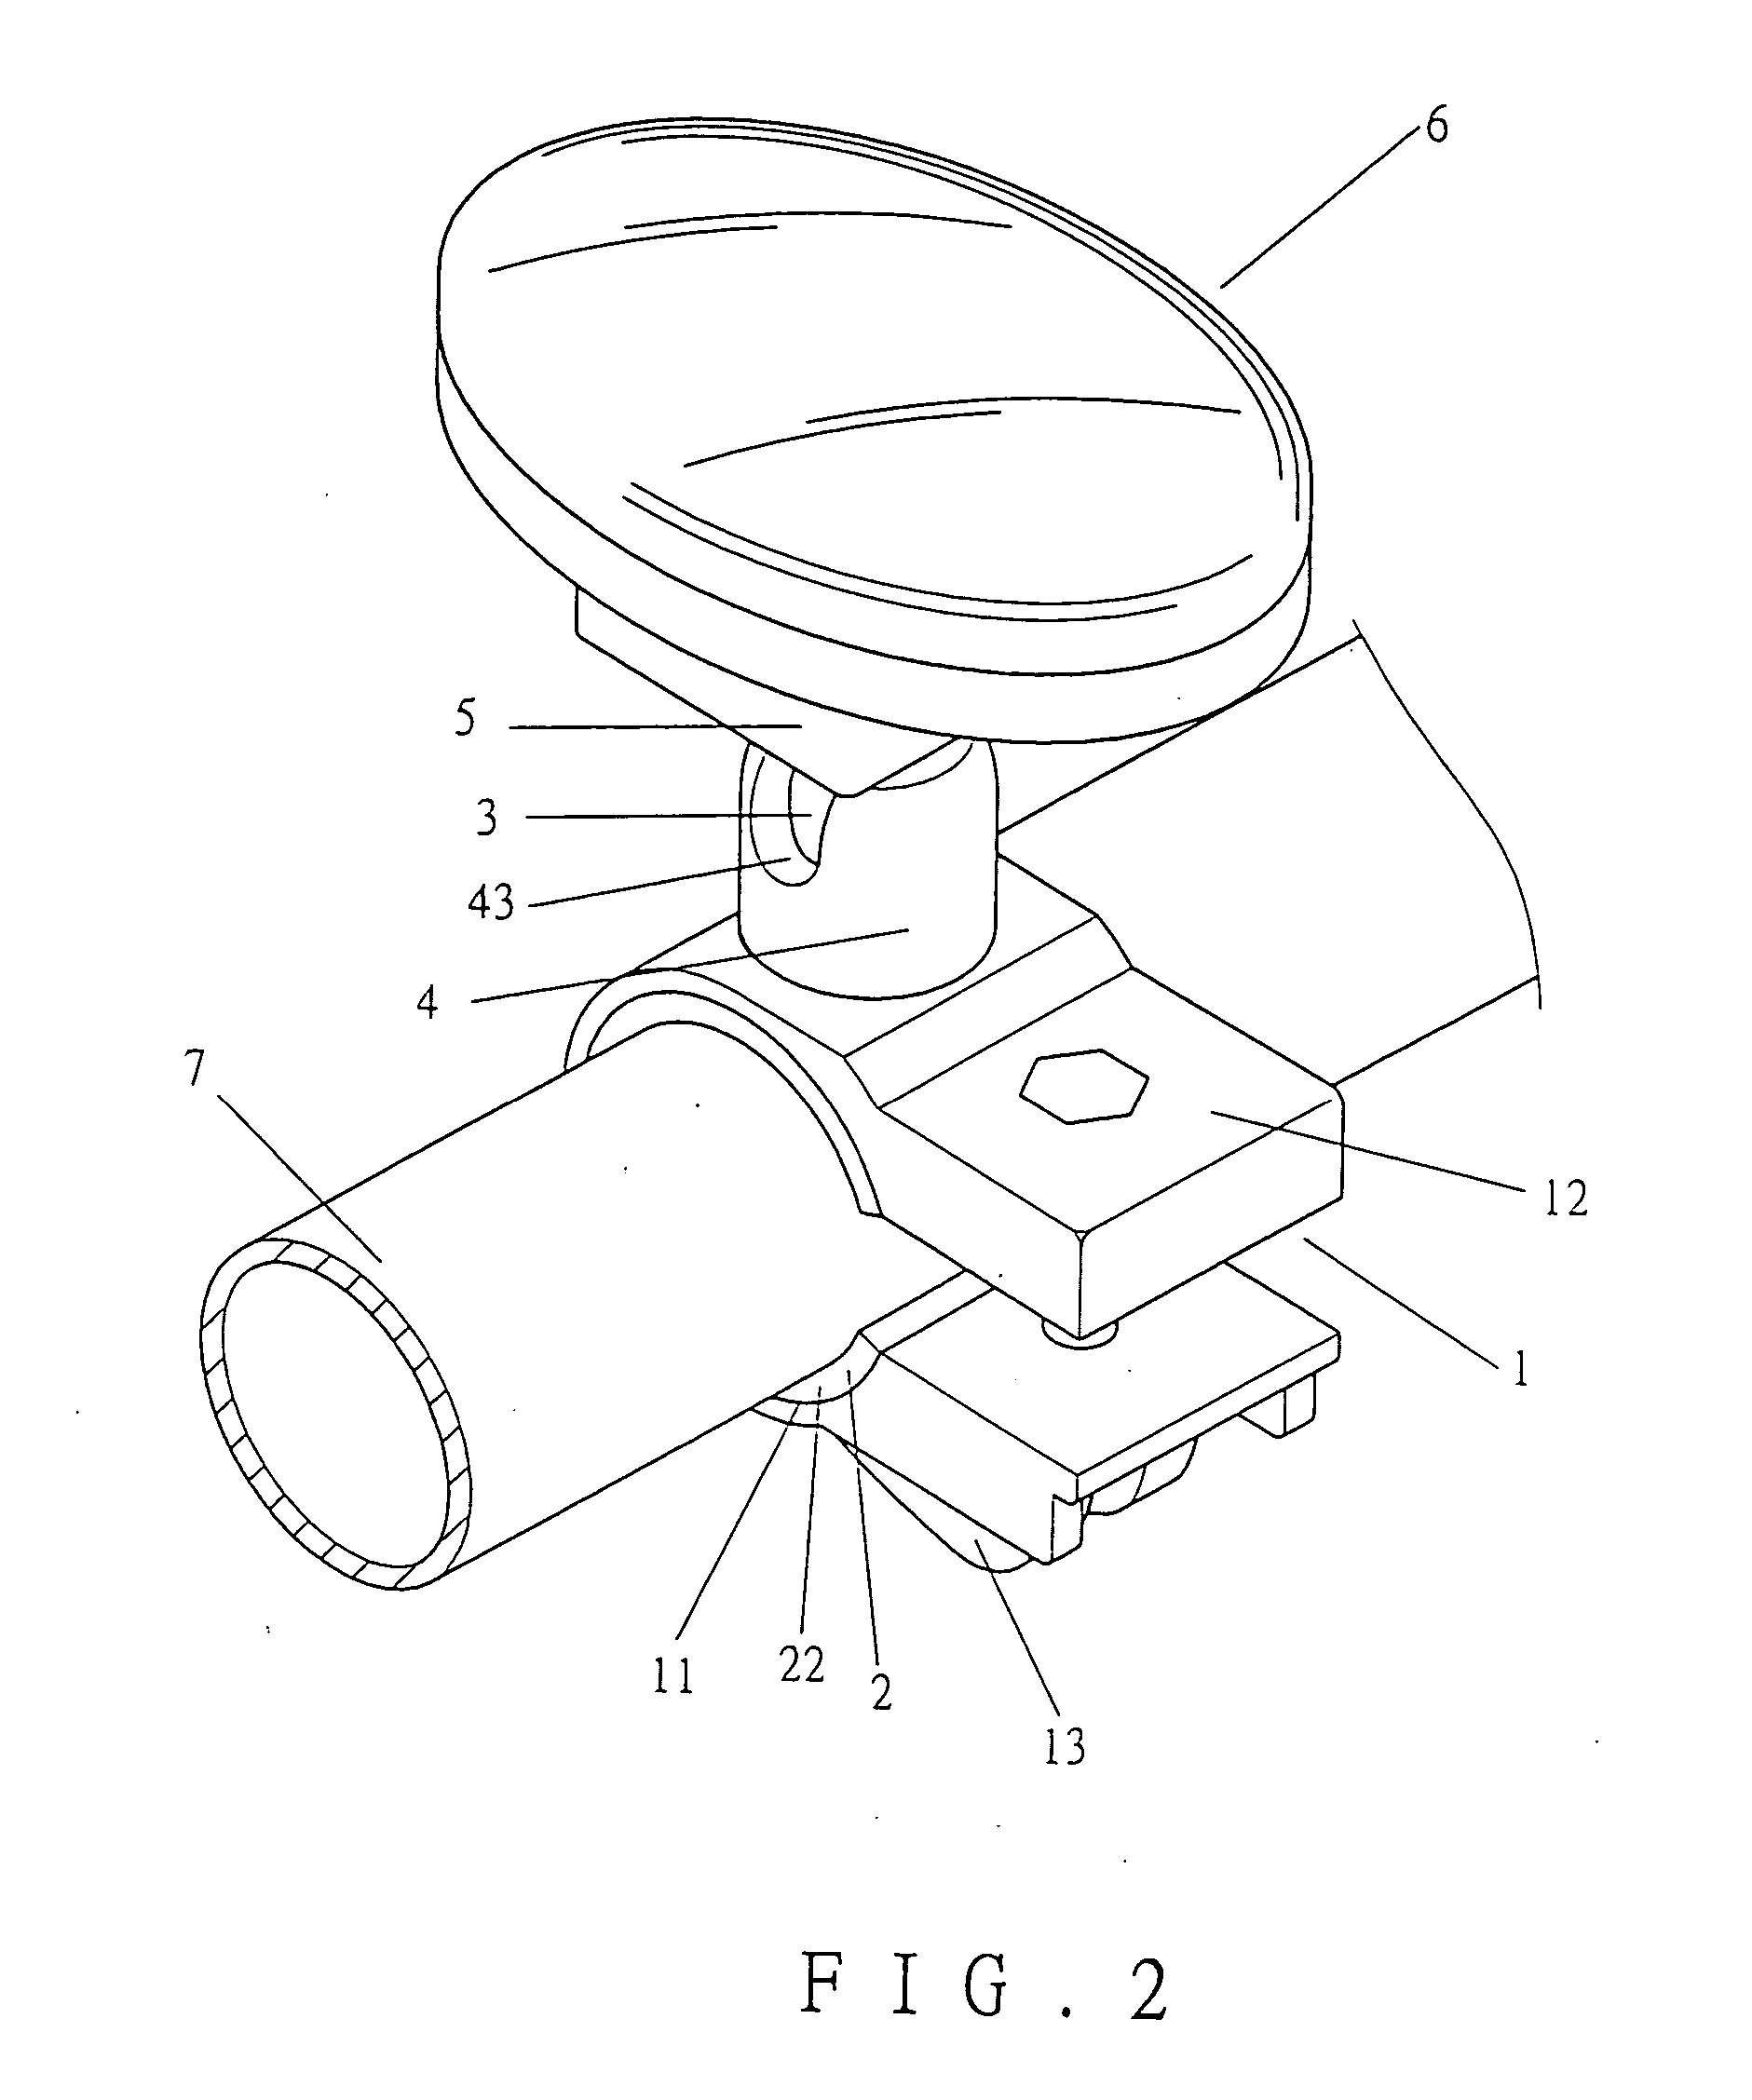 Adjustable attachment device for attaching an object to a tubular member